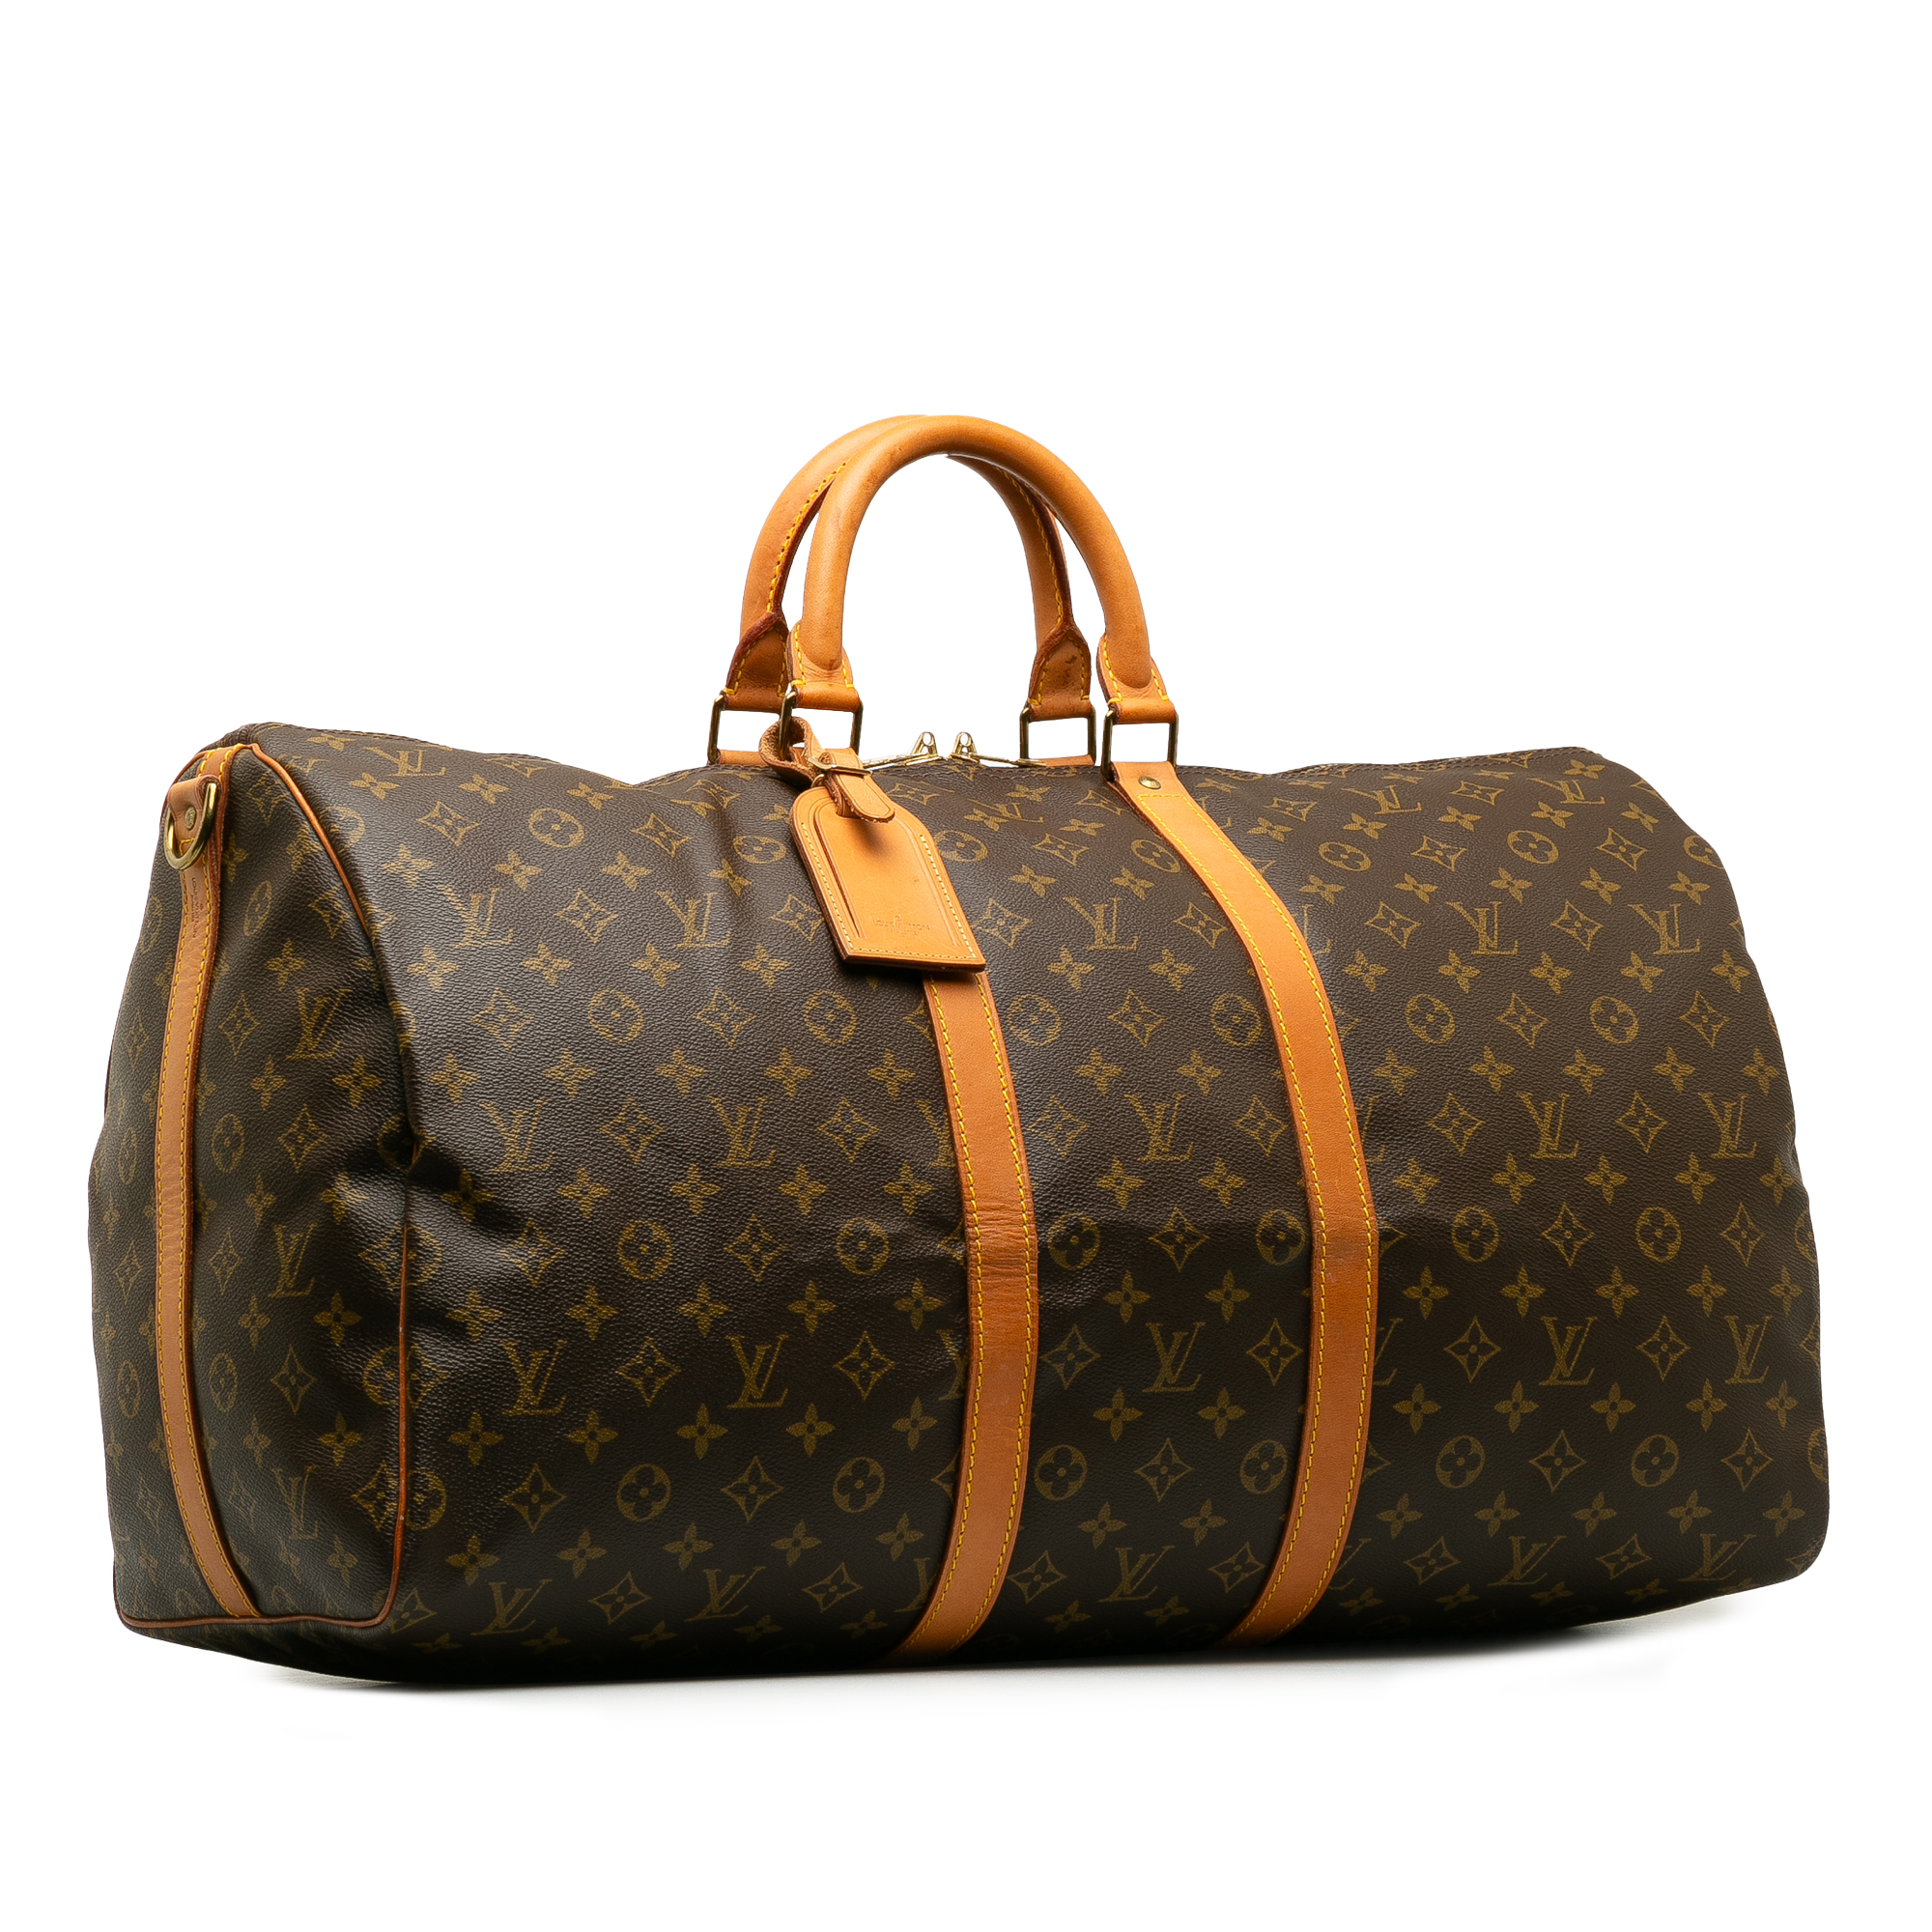 Louis Vuitton Monogram Keepall Bandouliere 55 - Image 2 of 10